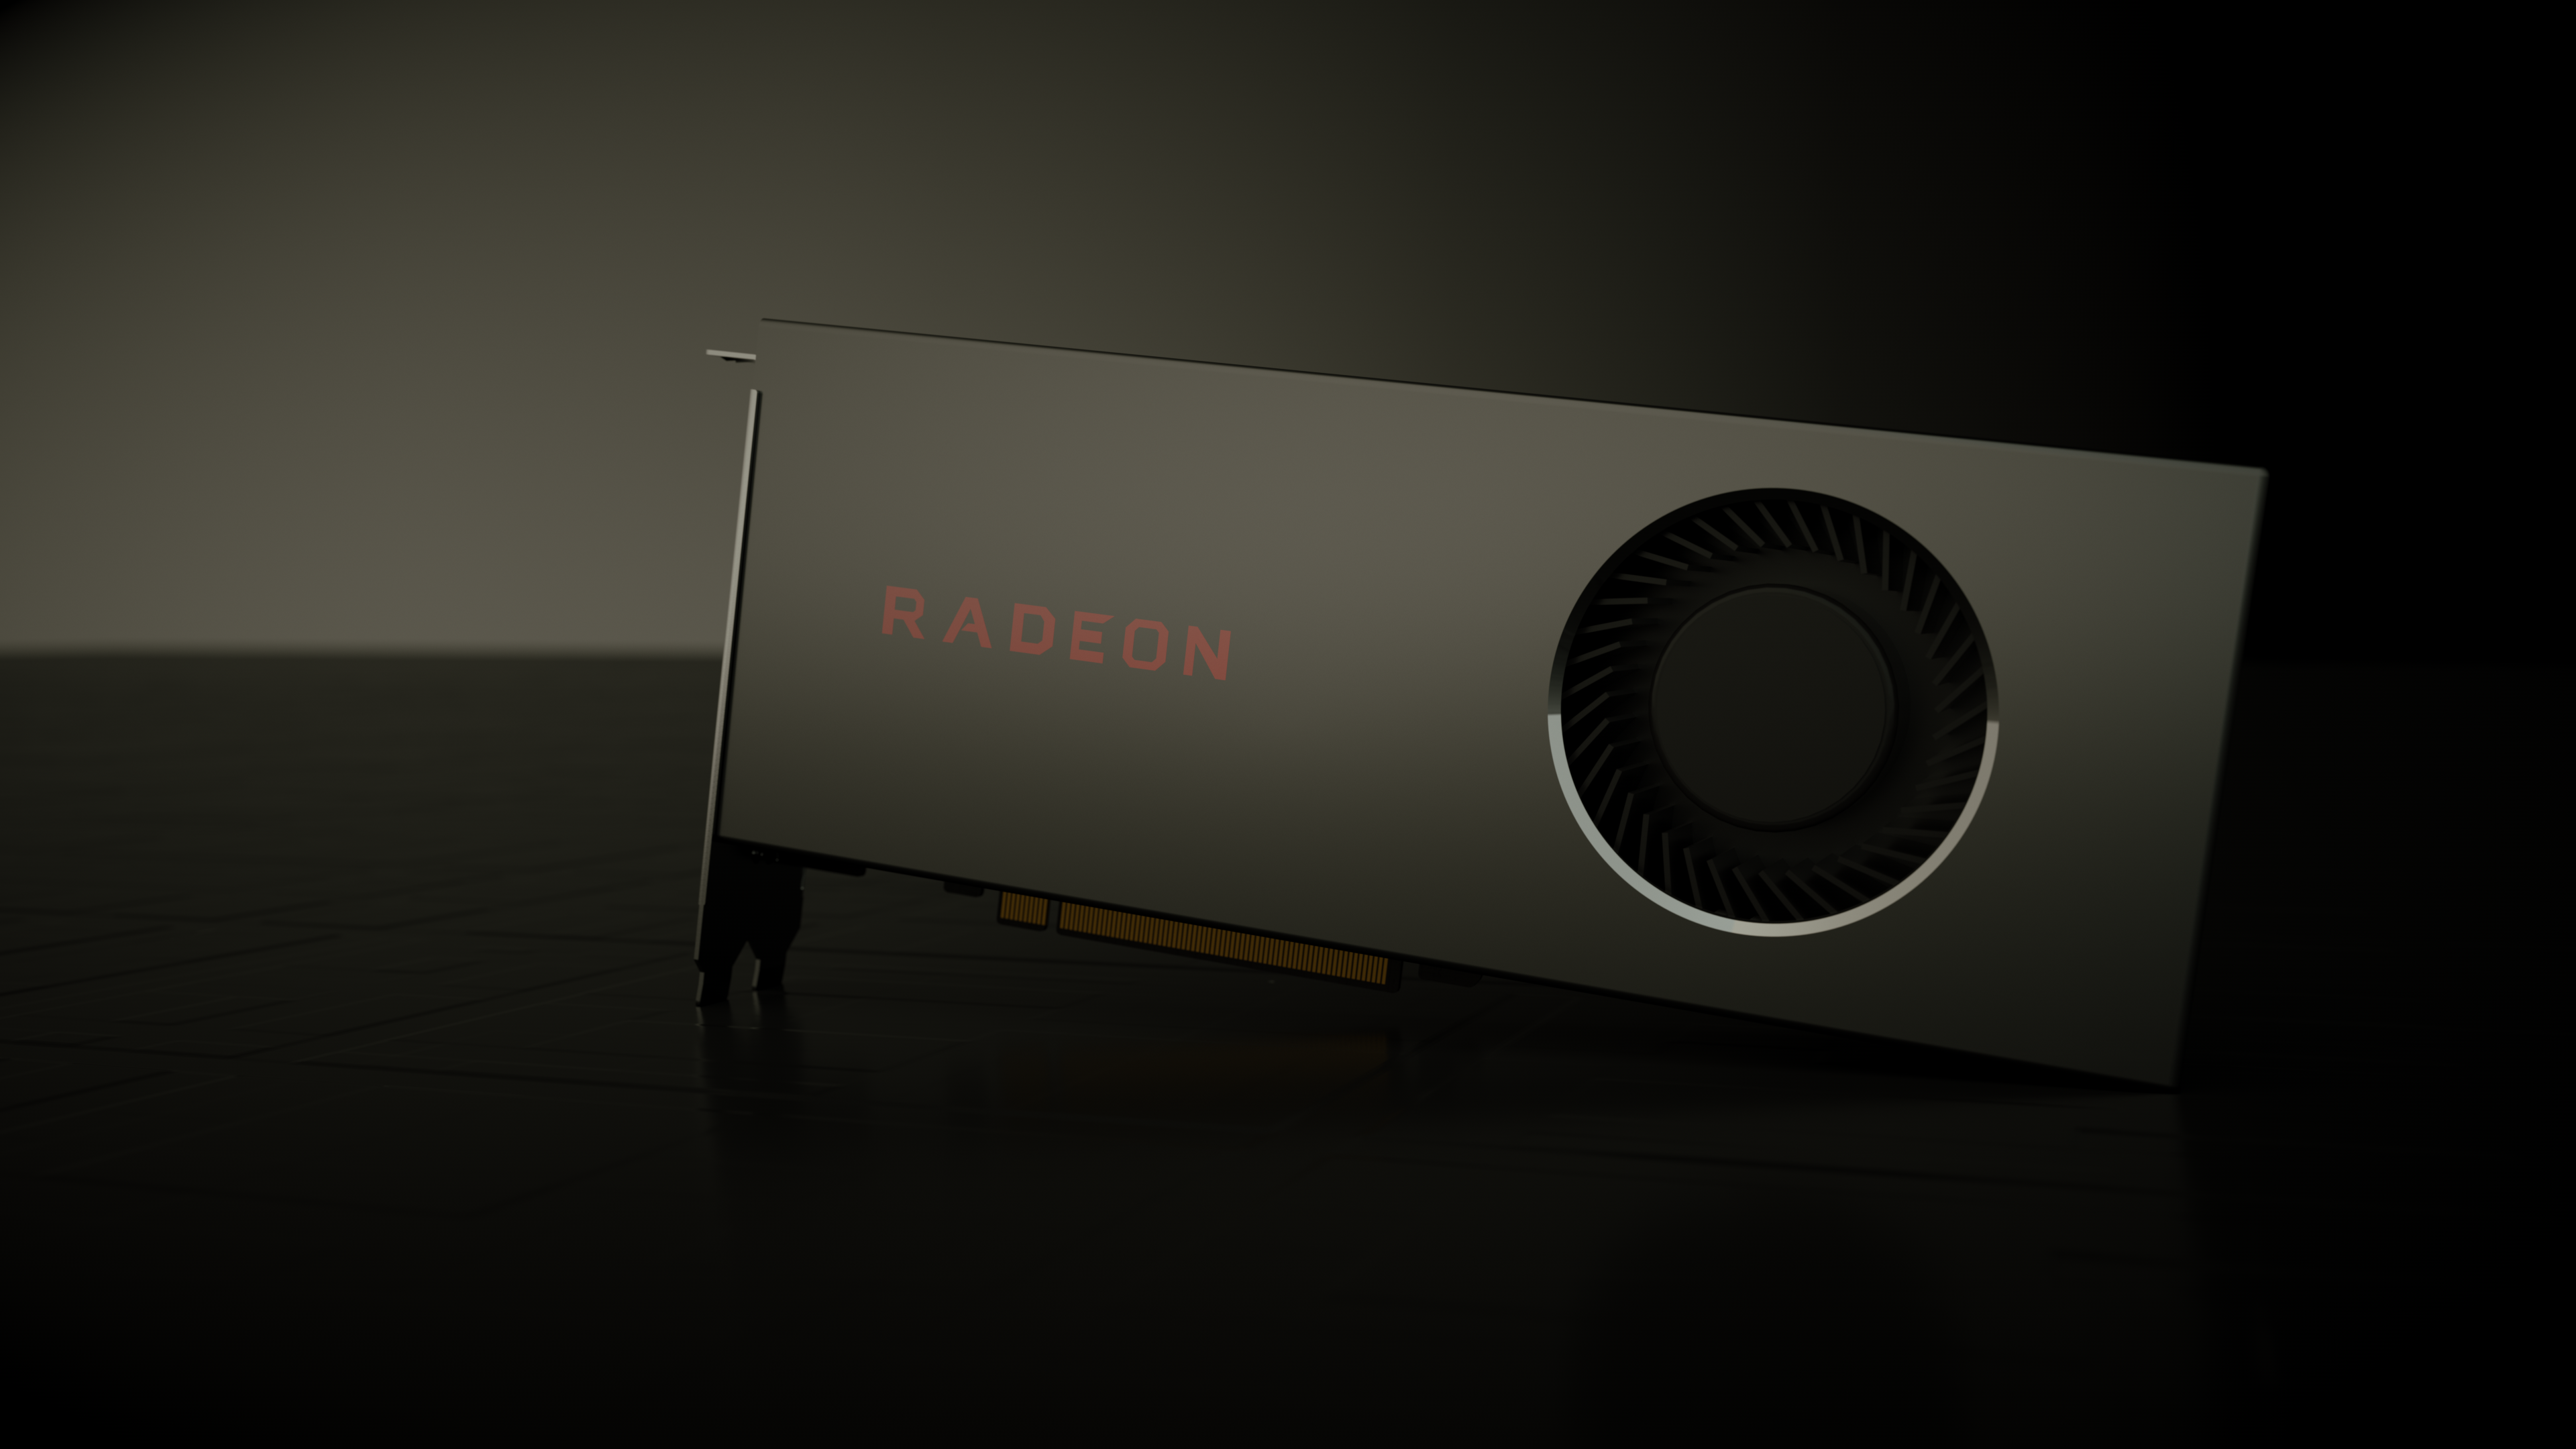 Radeon 4k Wallpapers For Your Desktop Or Mobile Screen Free And Easy To Download